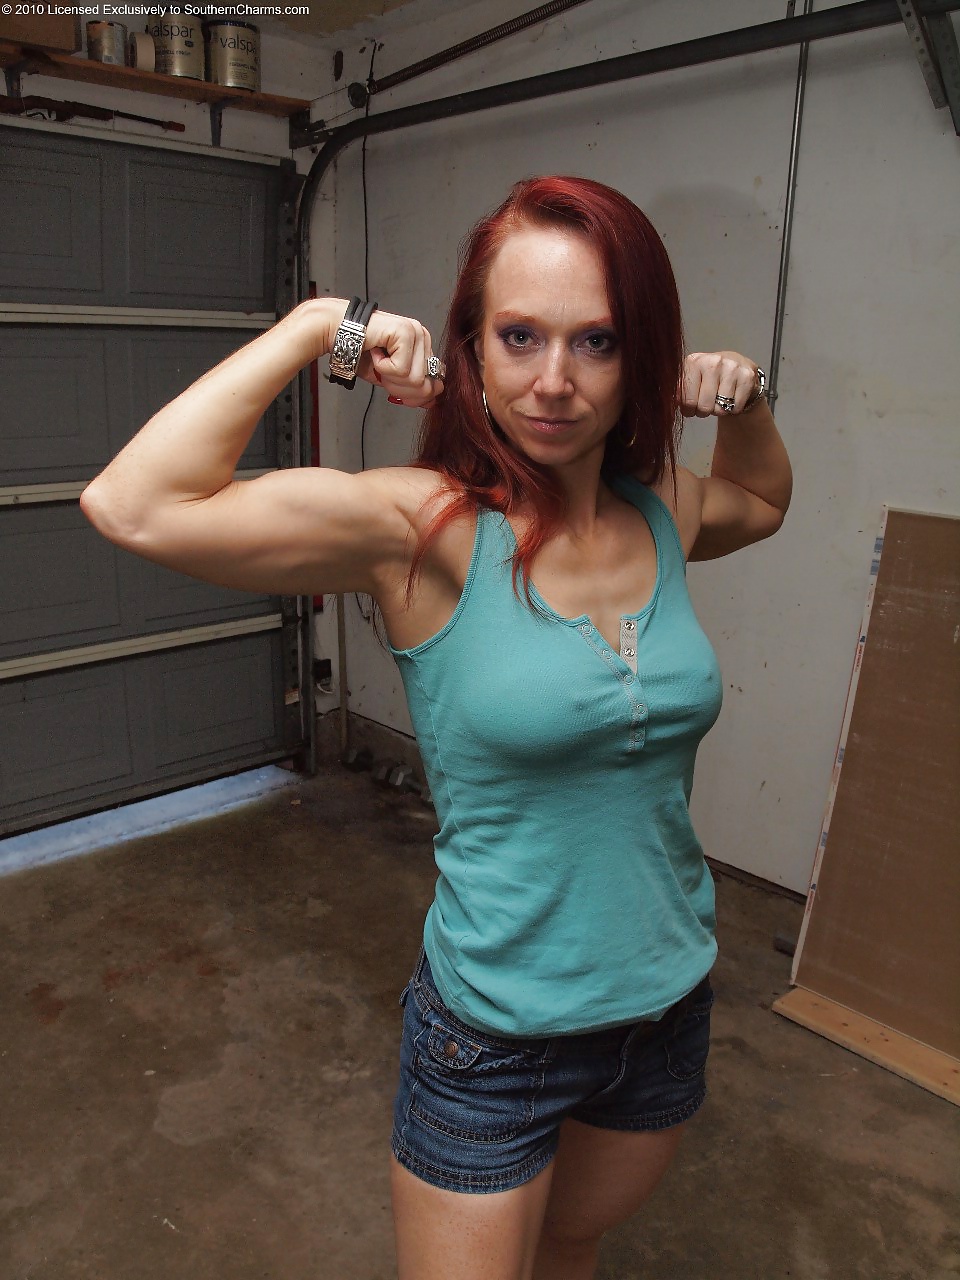 More related redhead muscle woman thighs.